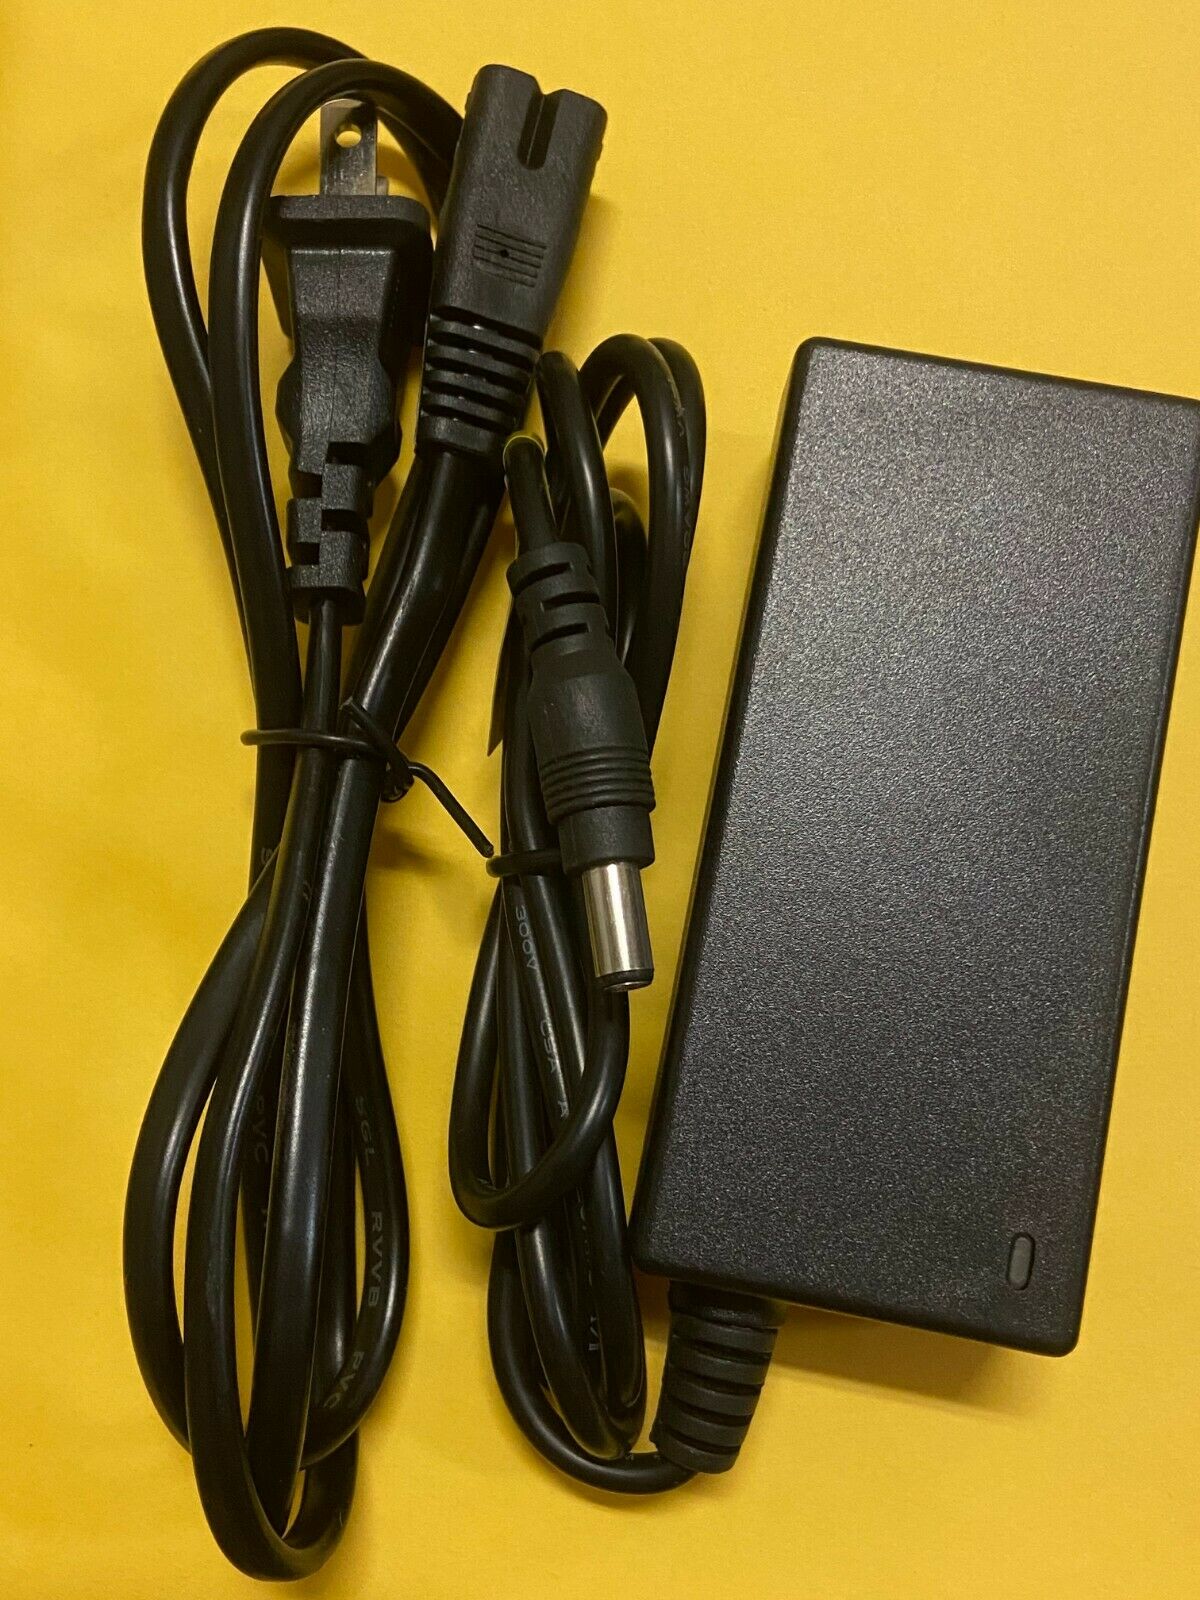 NEW AC/DC Adapter For rbd RT24-296005 RT24296005 Recliner Switching Power Supply NEW AC/DC Adapter For rbd RT24-296005 - Click Image to Close